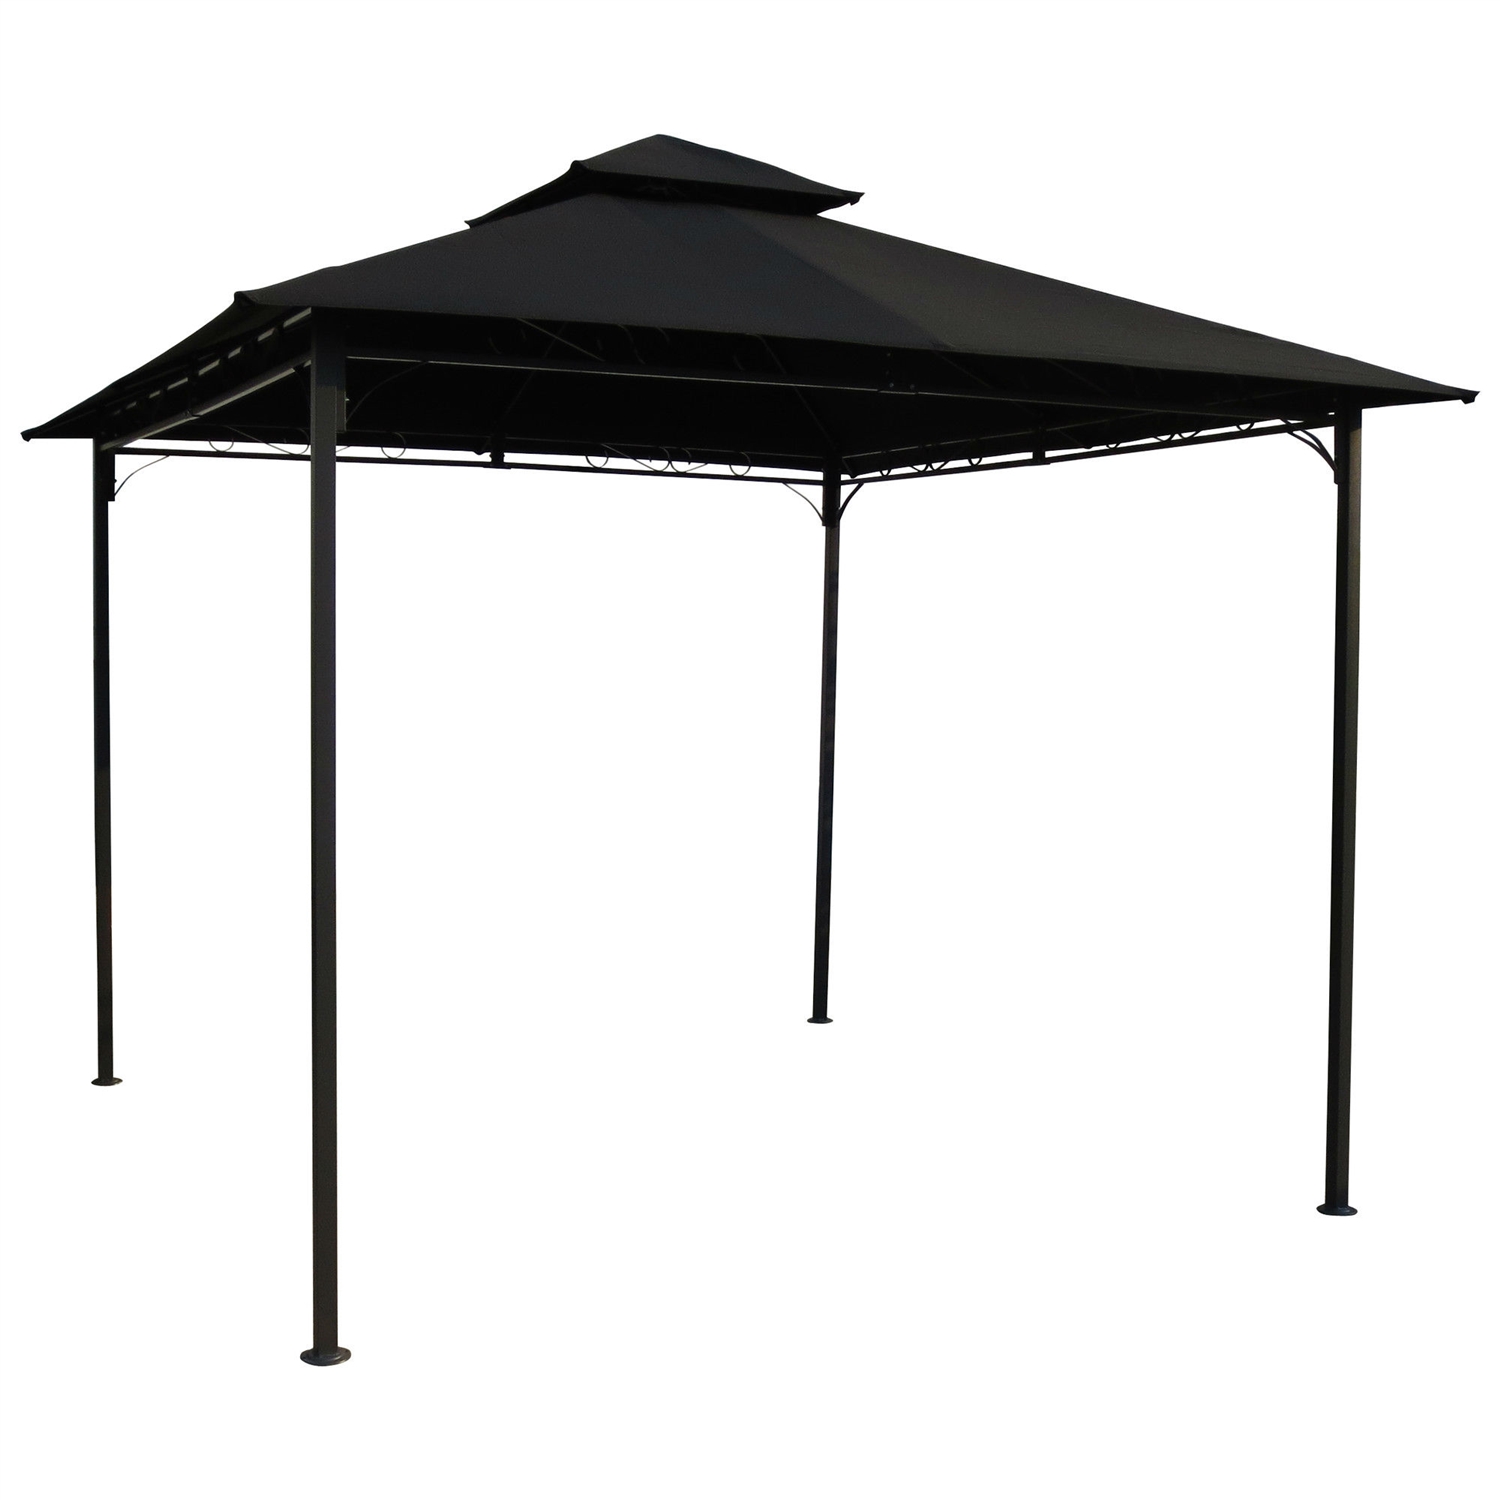 10-Ft x 10-Ft Outdoor Gazebo with Black Weather Resistant Fabric Canopy